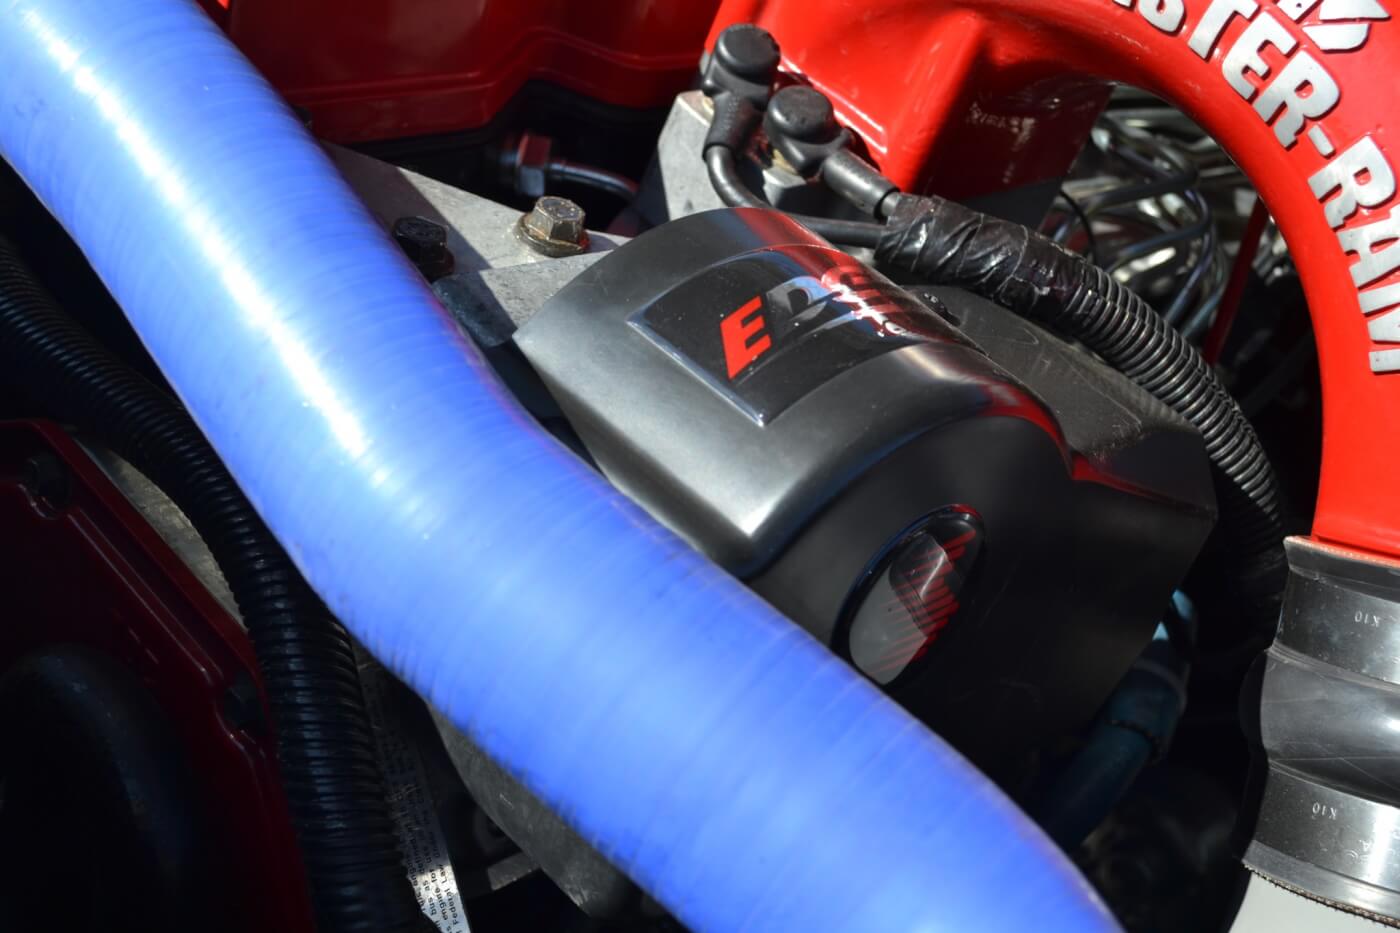 Although it might look like a normal VP44 pump, the Scheid Diesel-built VP44 flows a much greater amount of fuel than a stock unit. While the factory VP44's are limited to around 600rwhp (without nitrous) the Scheid pump makes close to 750rwhp based upon trap speed.